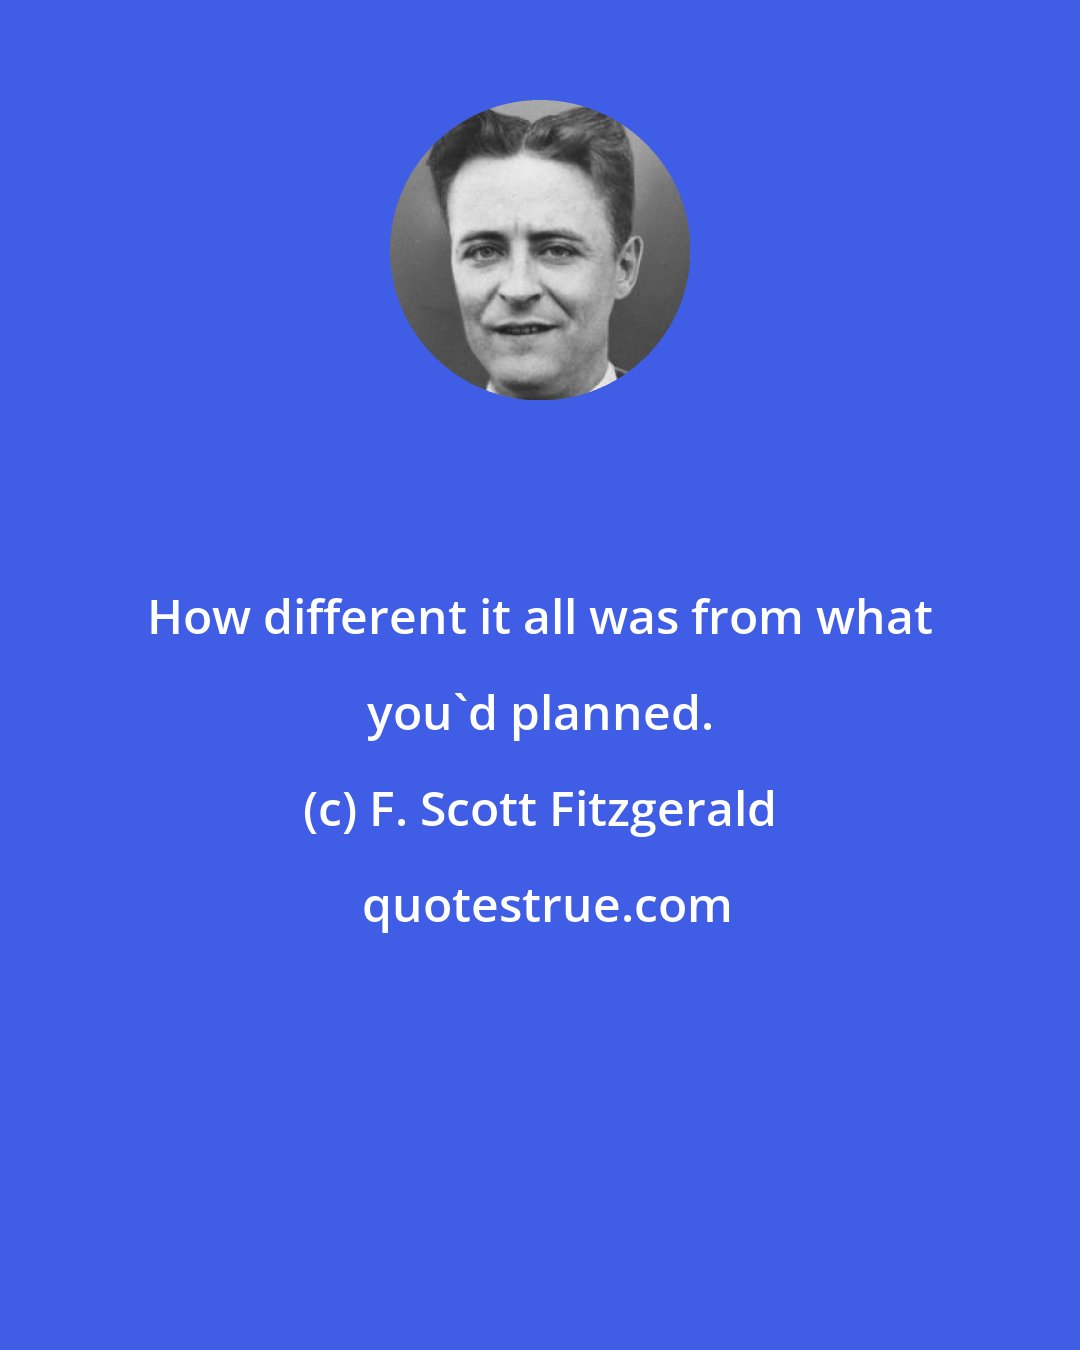 F. Scott Fitzgerald: How different it all was from what you'd planned.